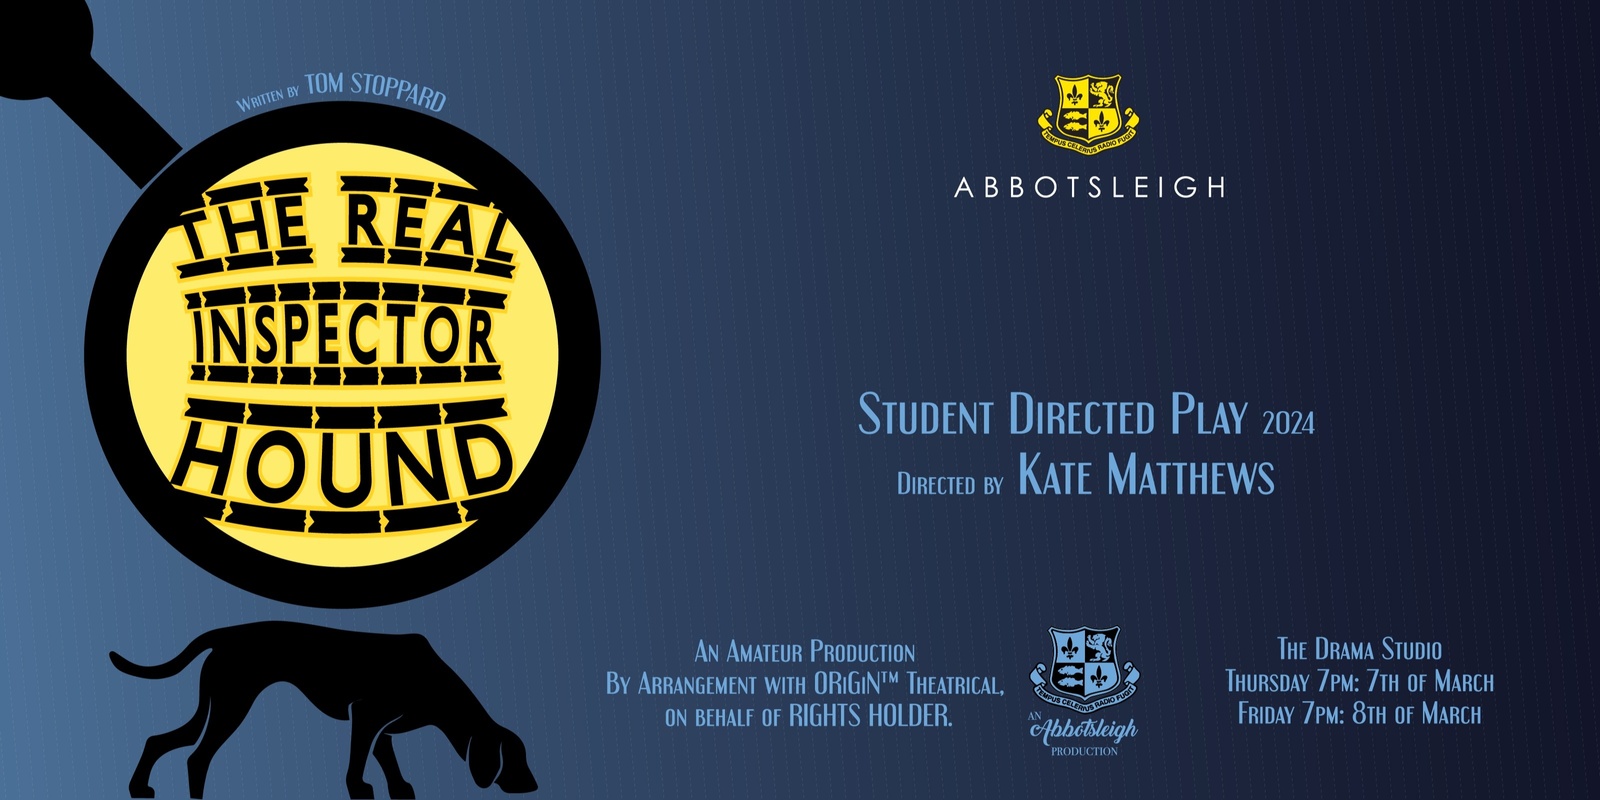 Banner image for 2024 Student Directed Play - The Real Inspector Hound